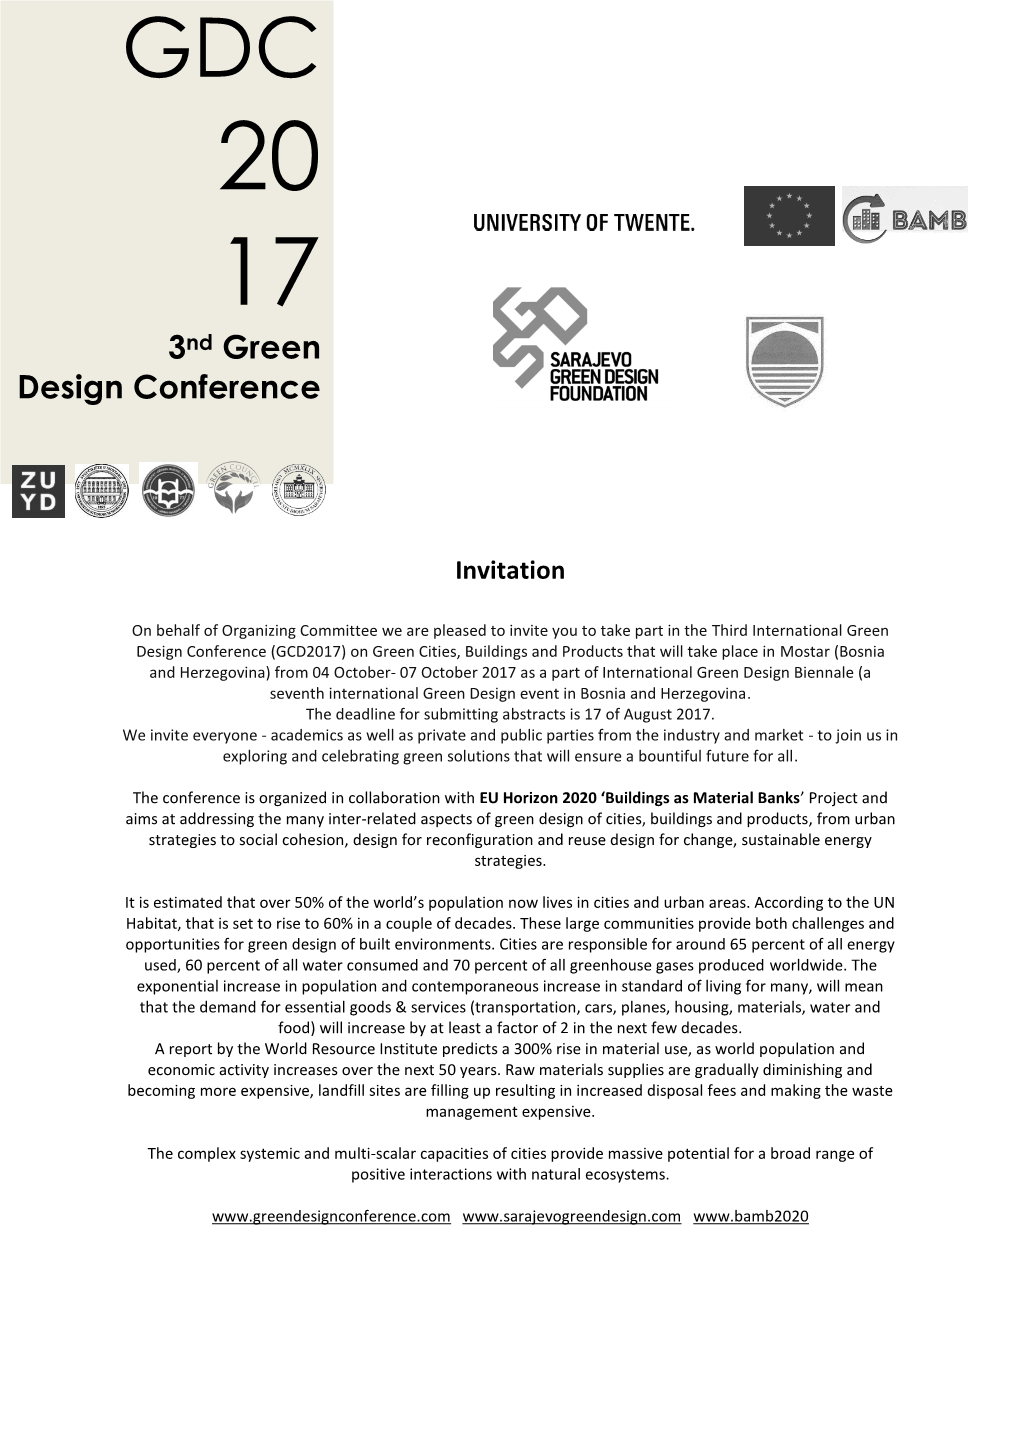 3Nd Green Design Conference